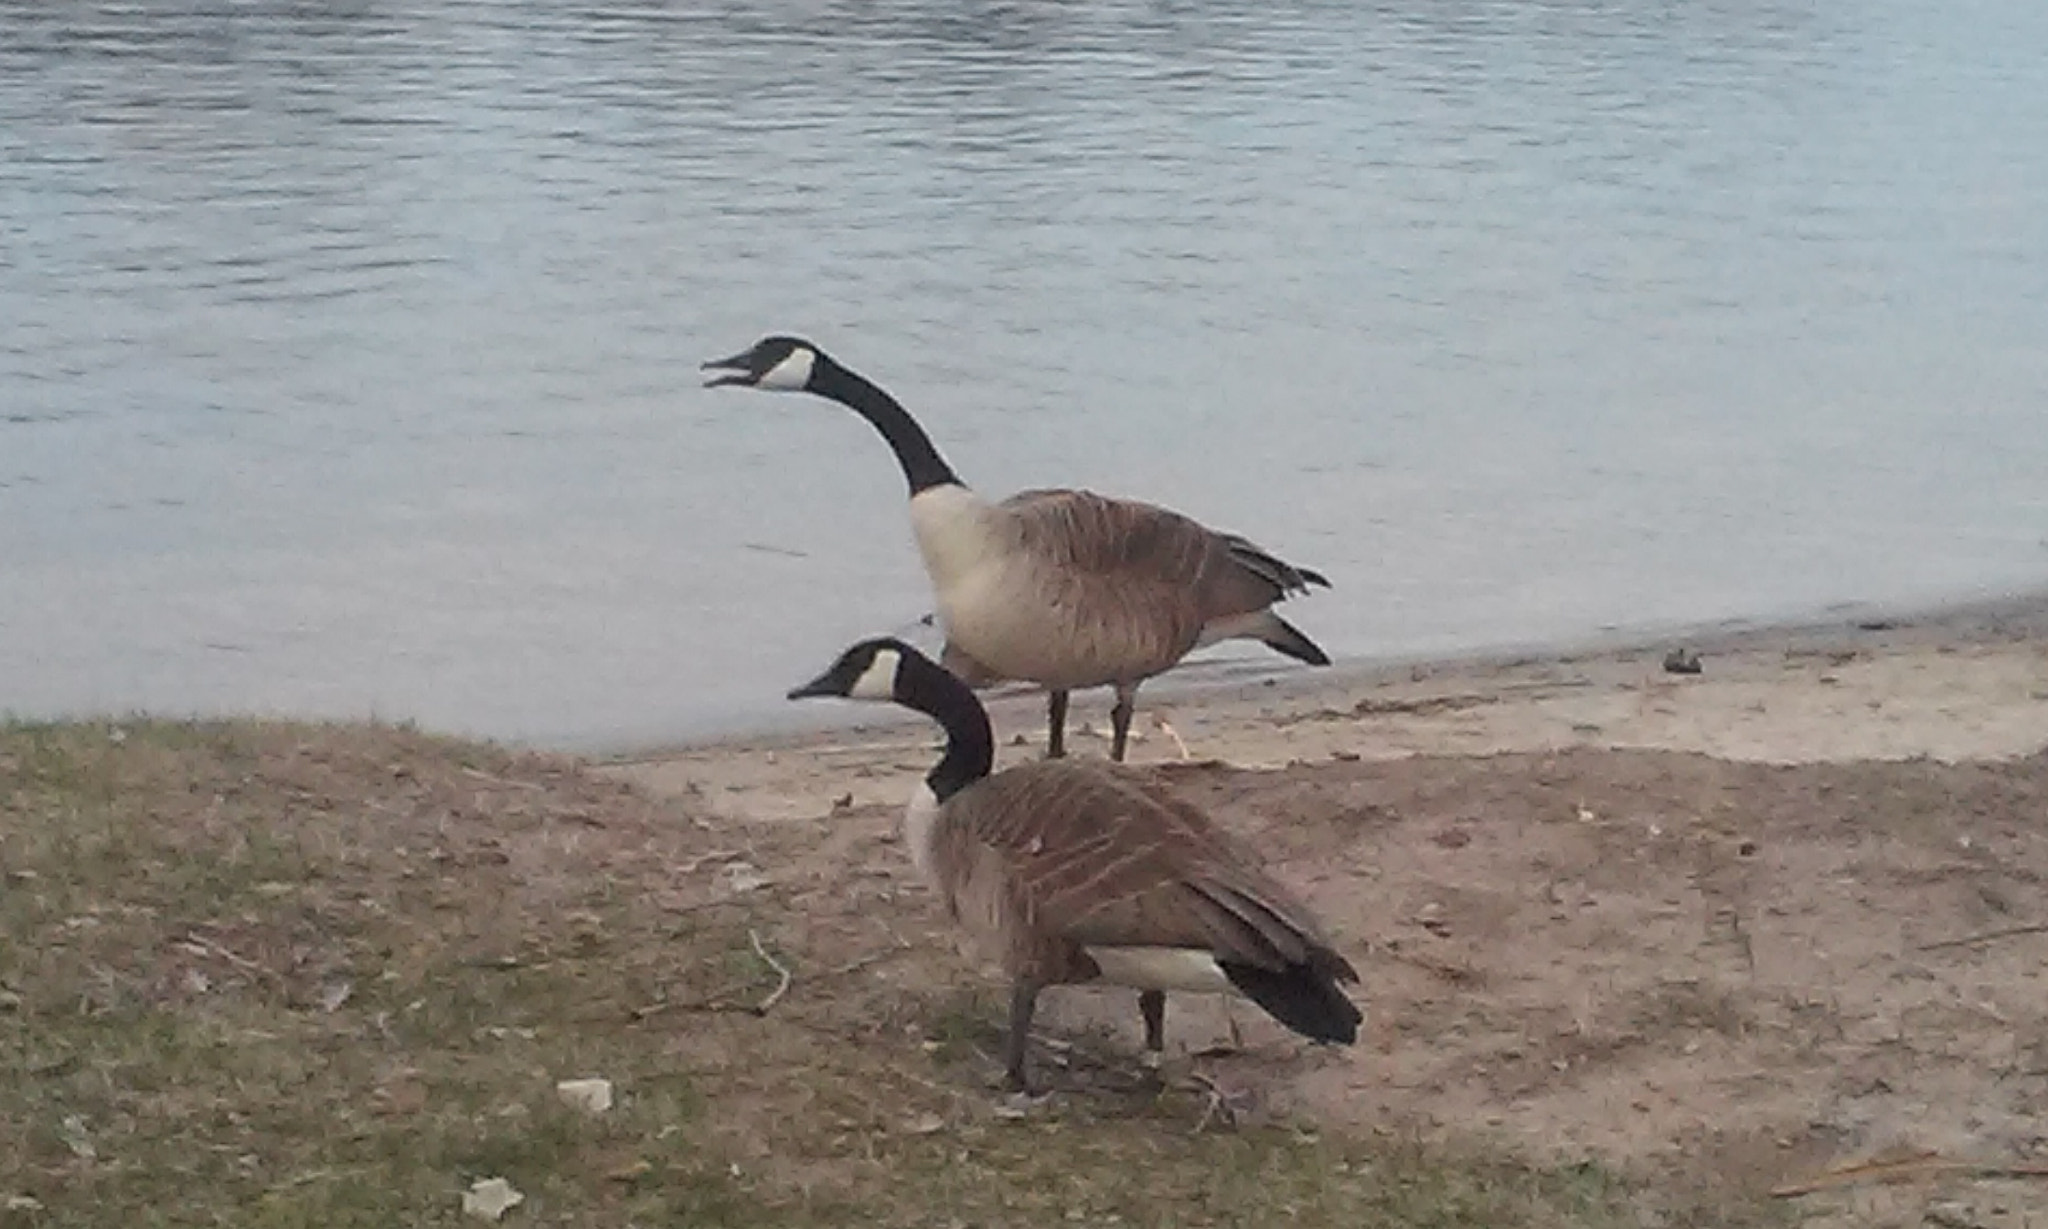 LG Optimus Exceed 2 sample photo. Geese photography